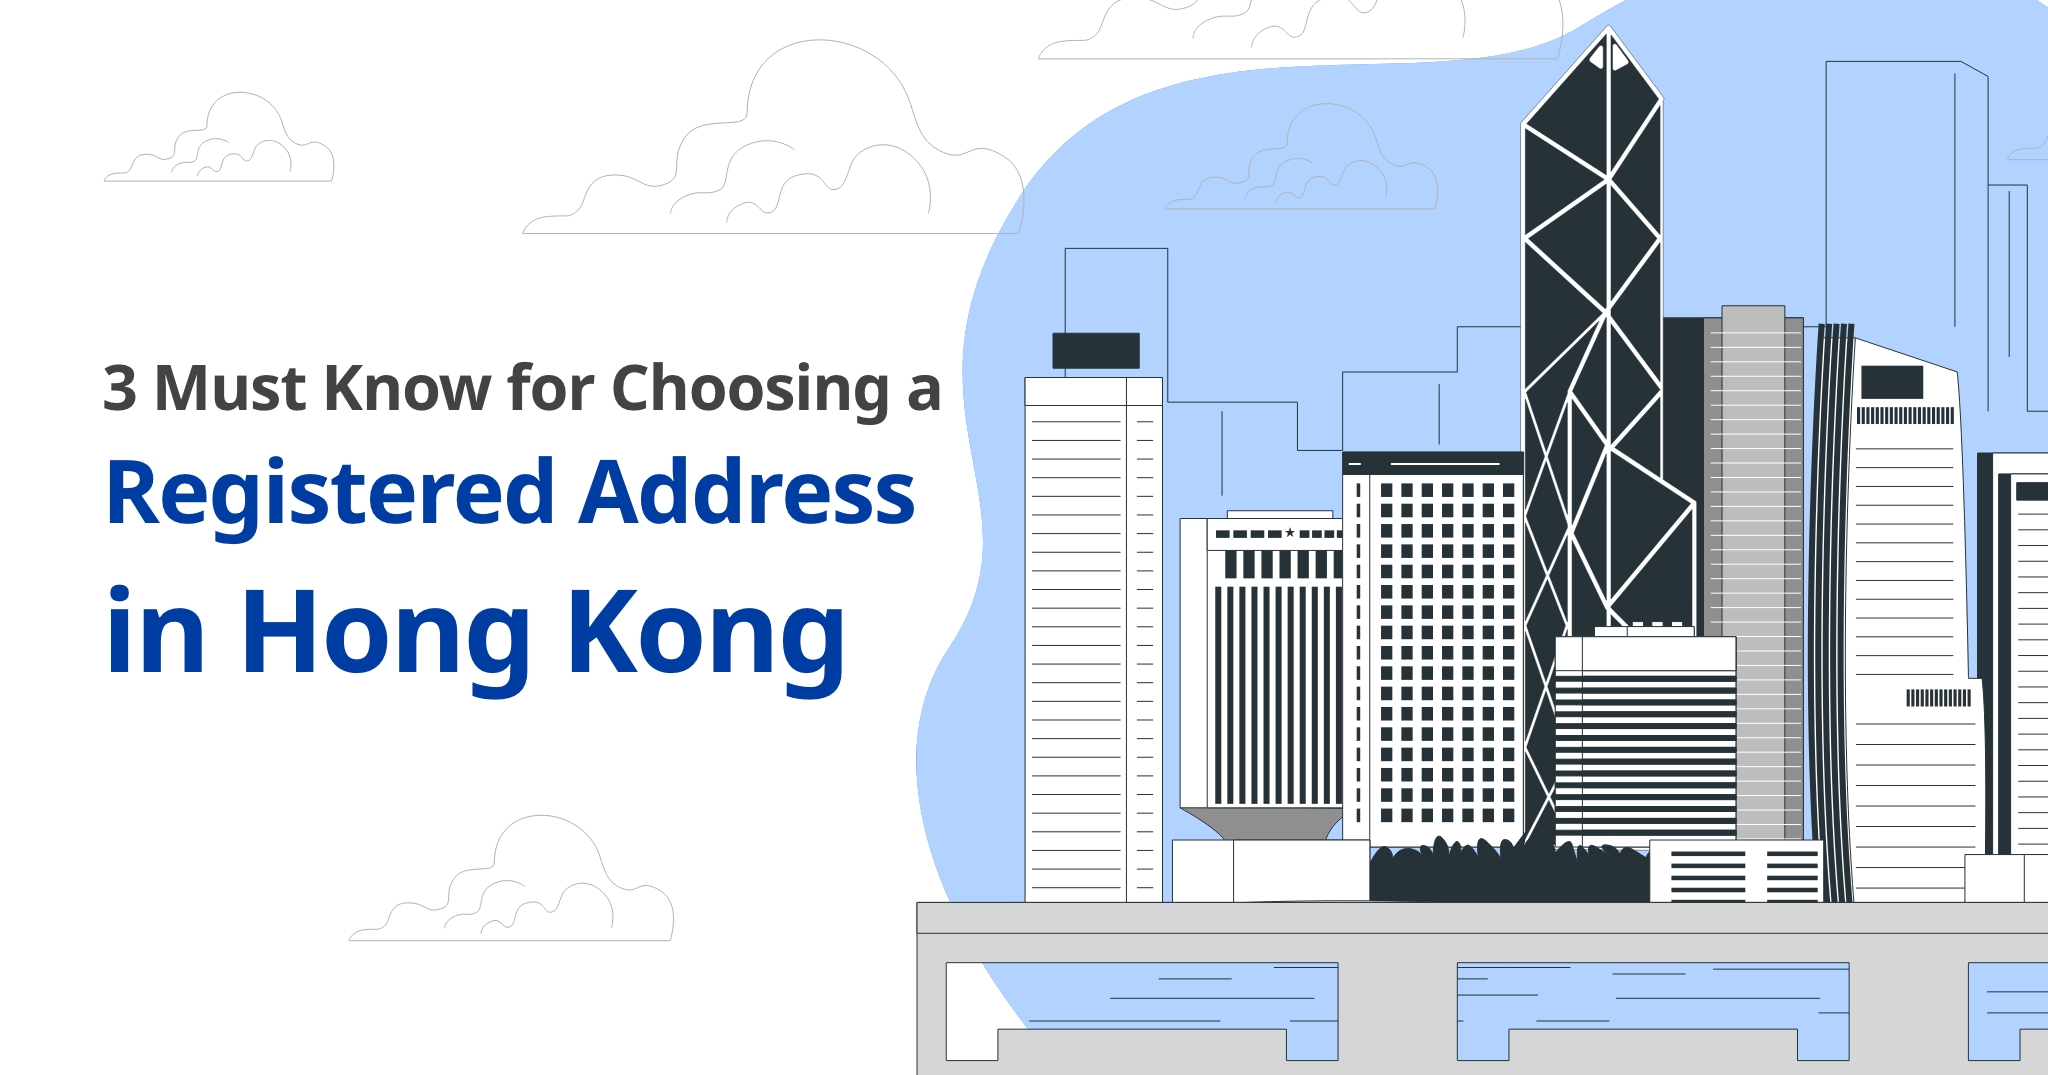 3 Must Know for Choosing a Registered Address in Hong Kong